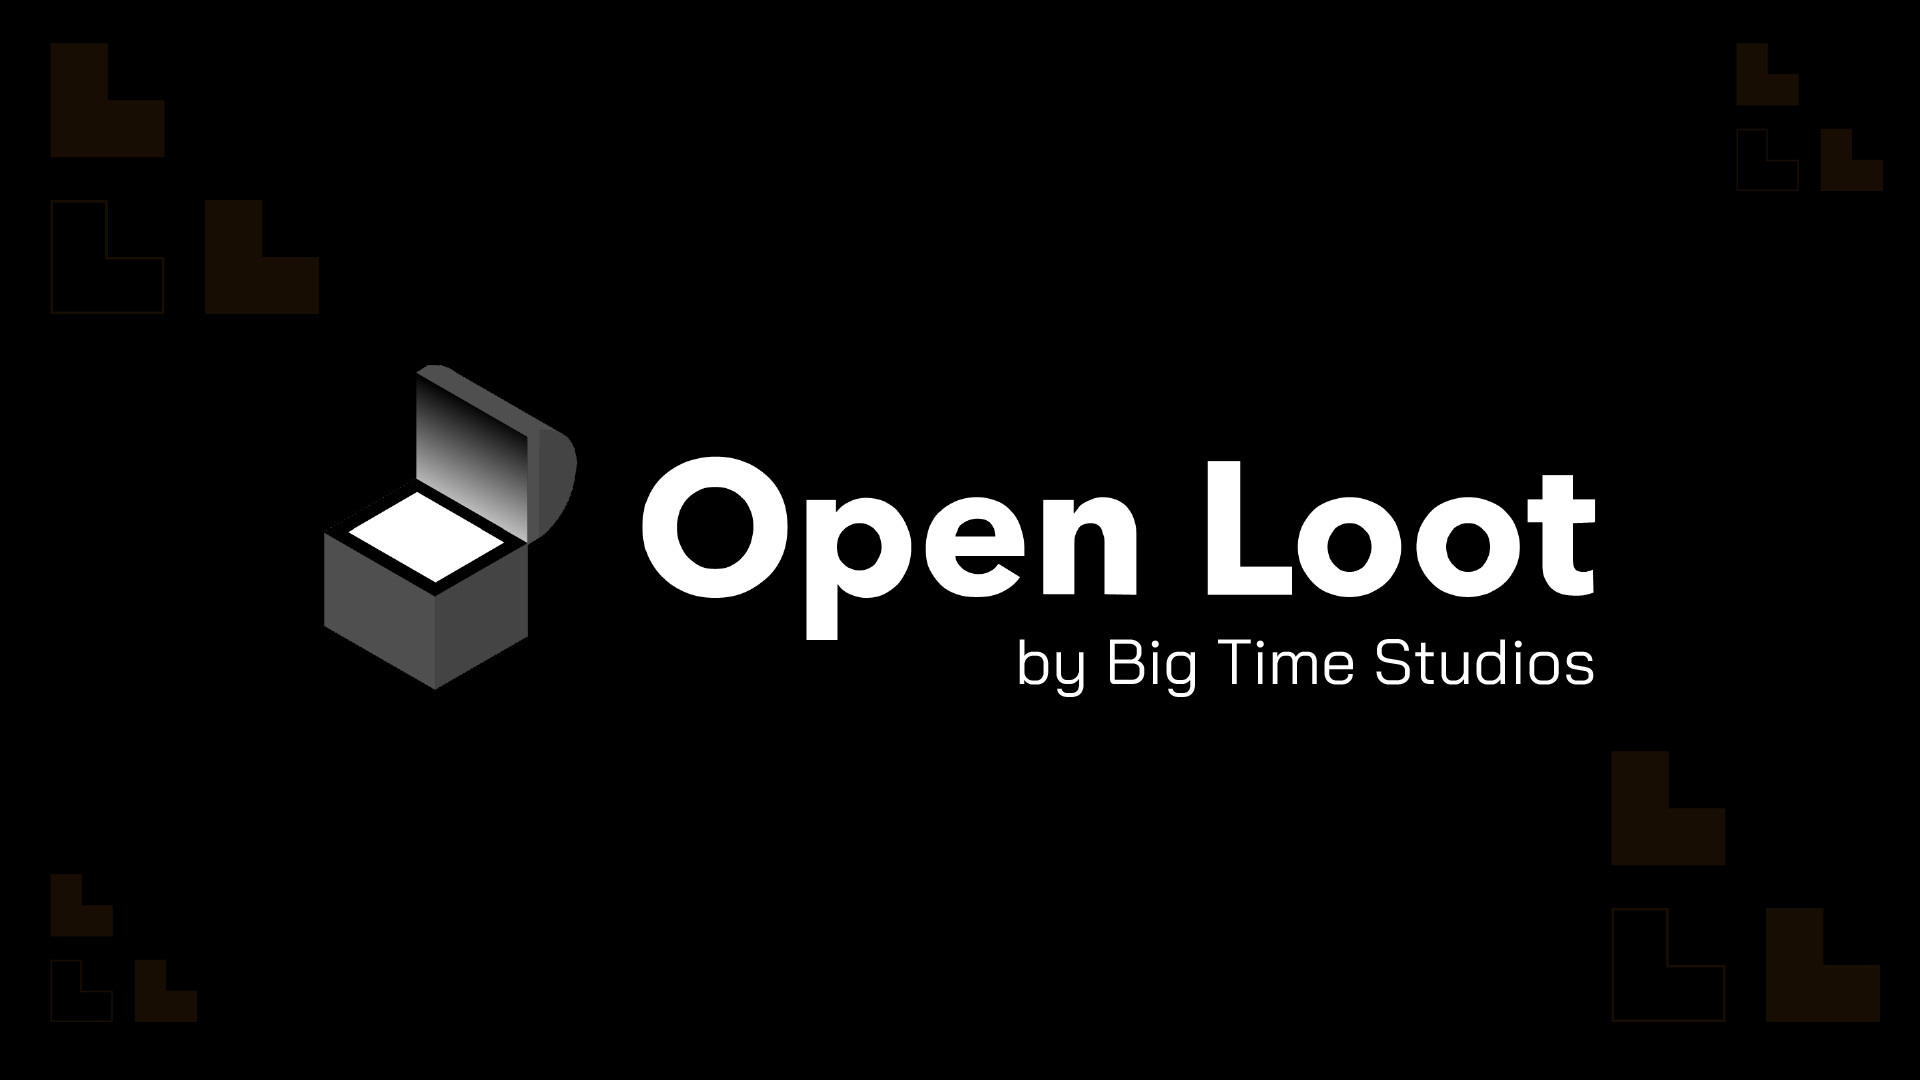 Big Time Studios Introduces The OPEN LOOT Gaming Platform and Fund